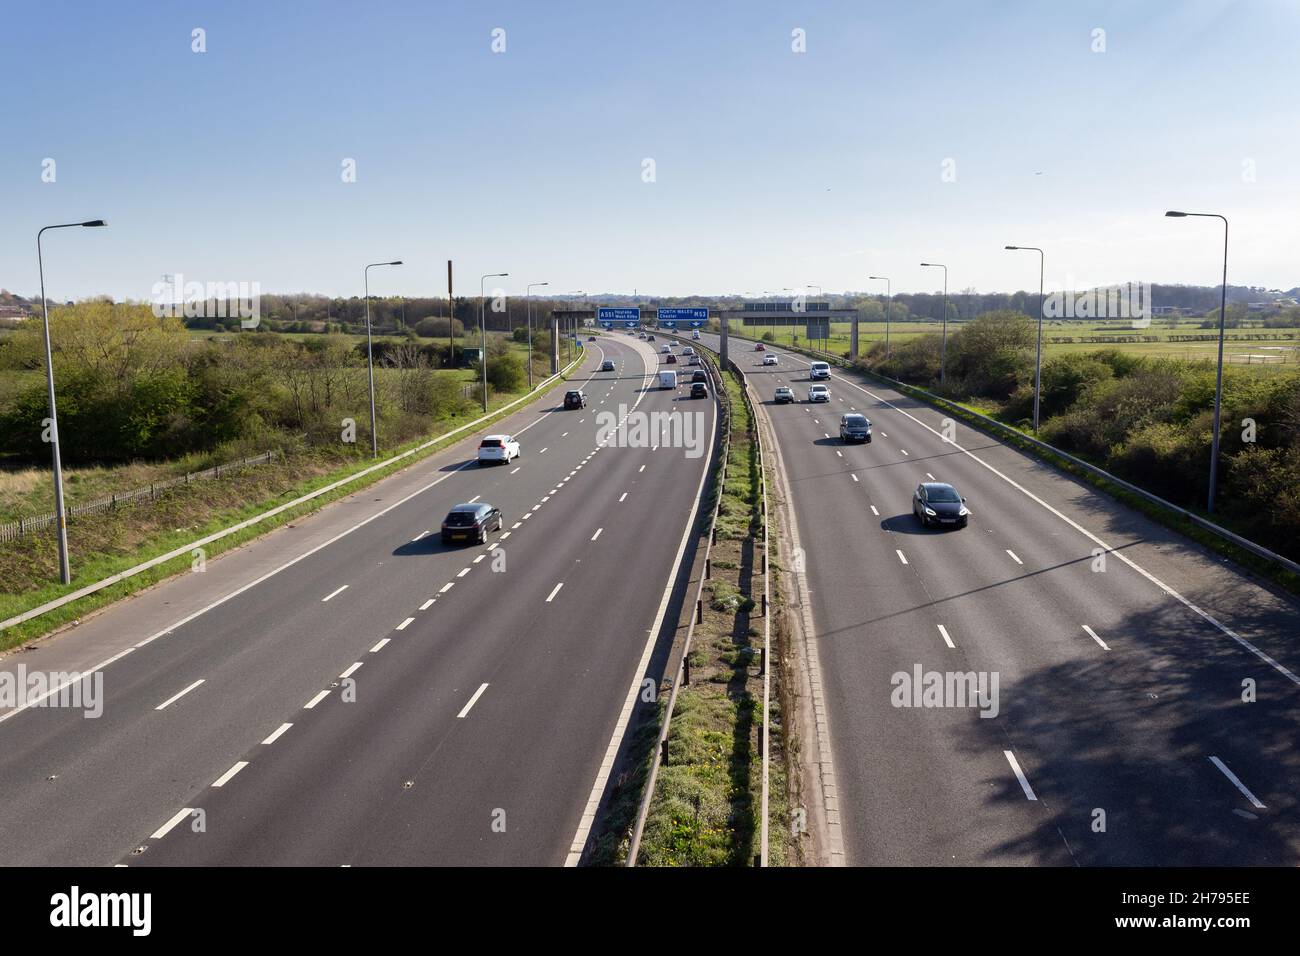 Moreton, UK: M53 motorway, approach to Junction 2 (A551 to Hoylake and West Kirby), from Fender lane (A553) overpass. Stock Photo